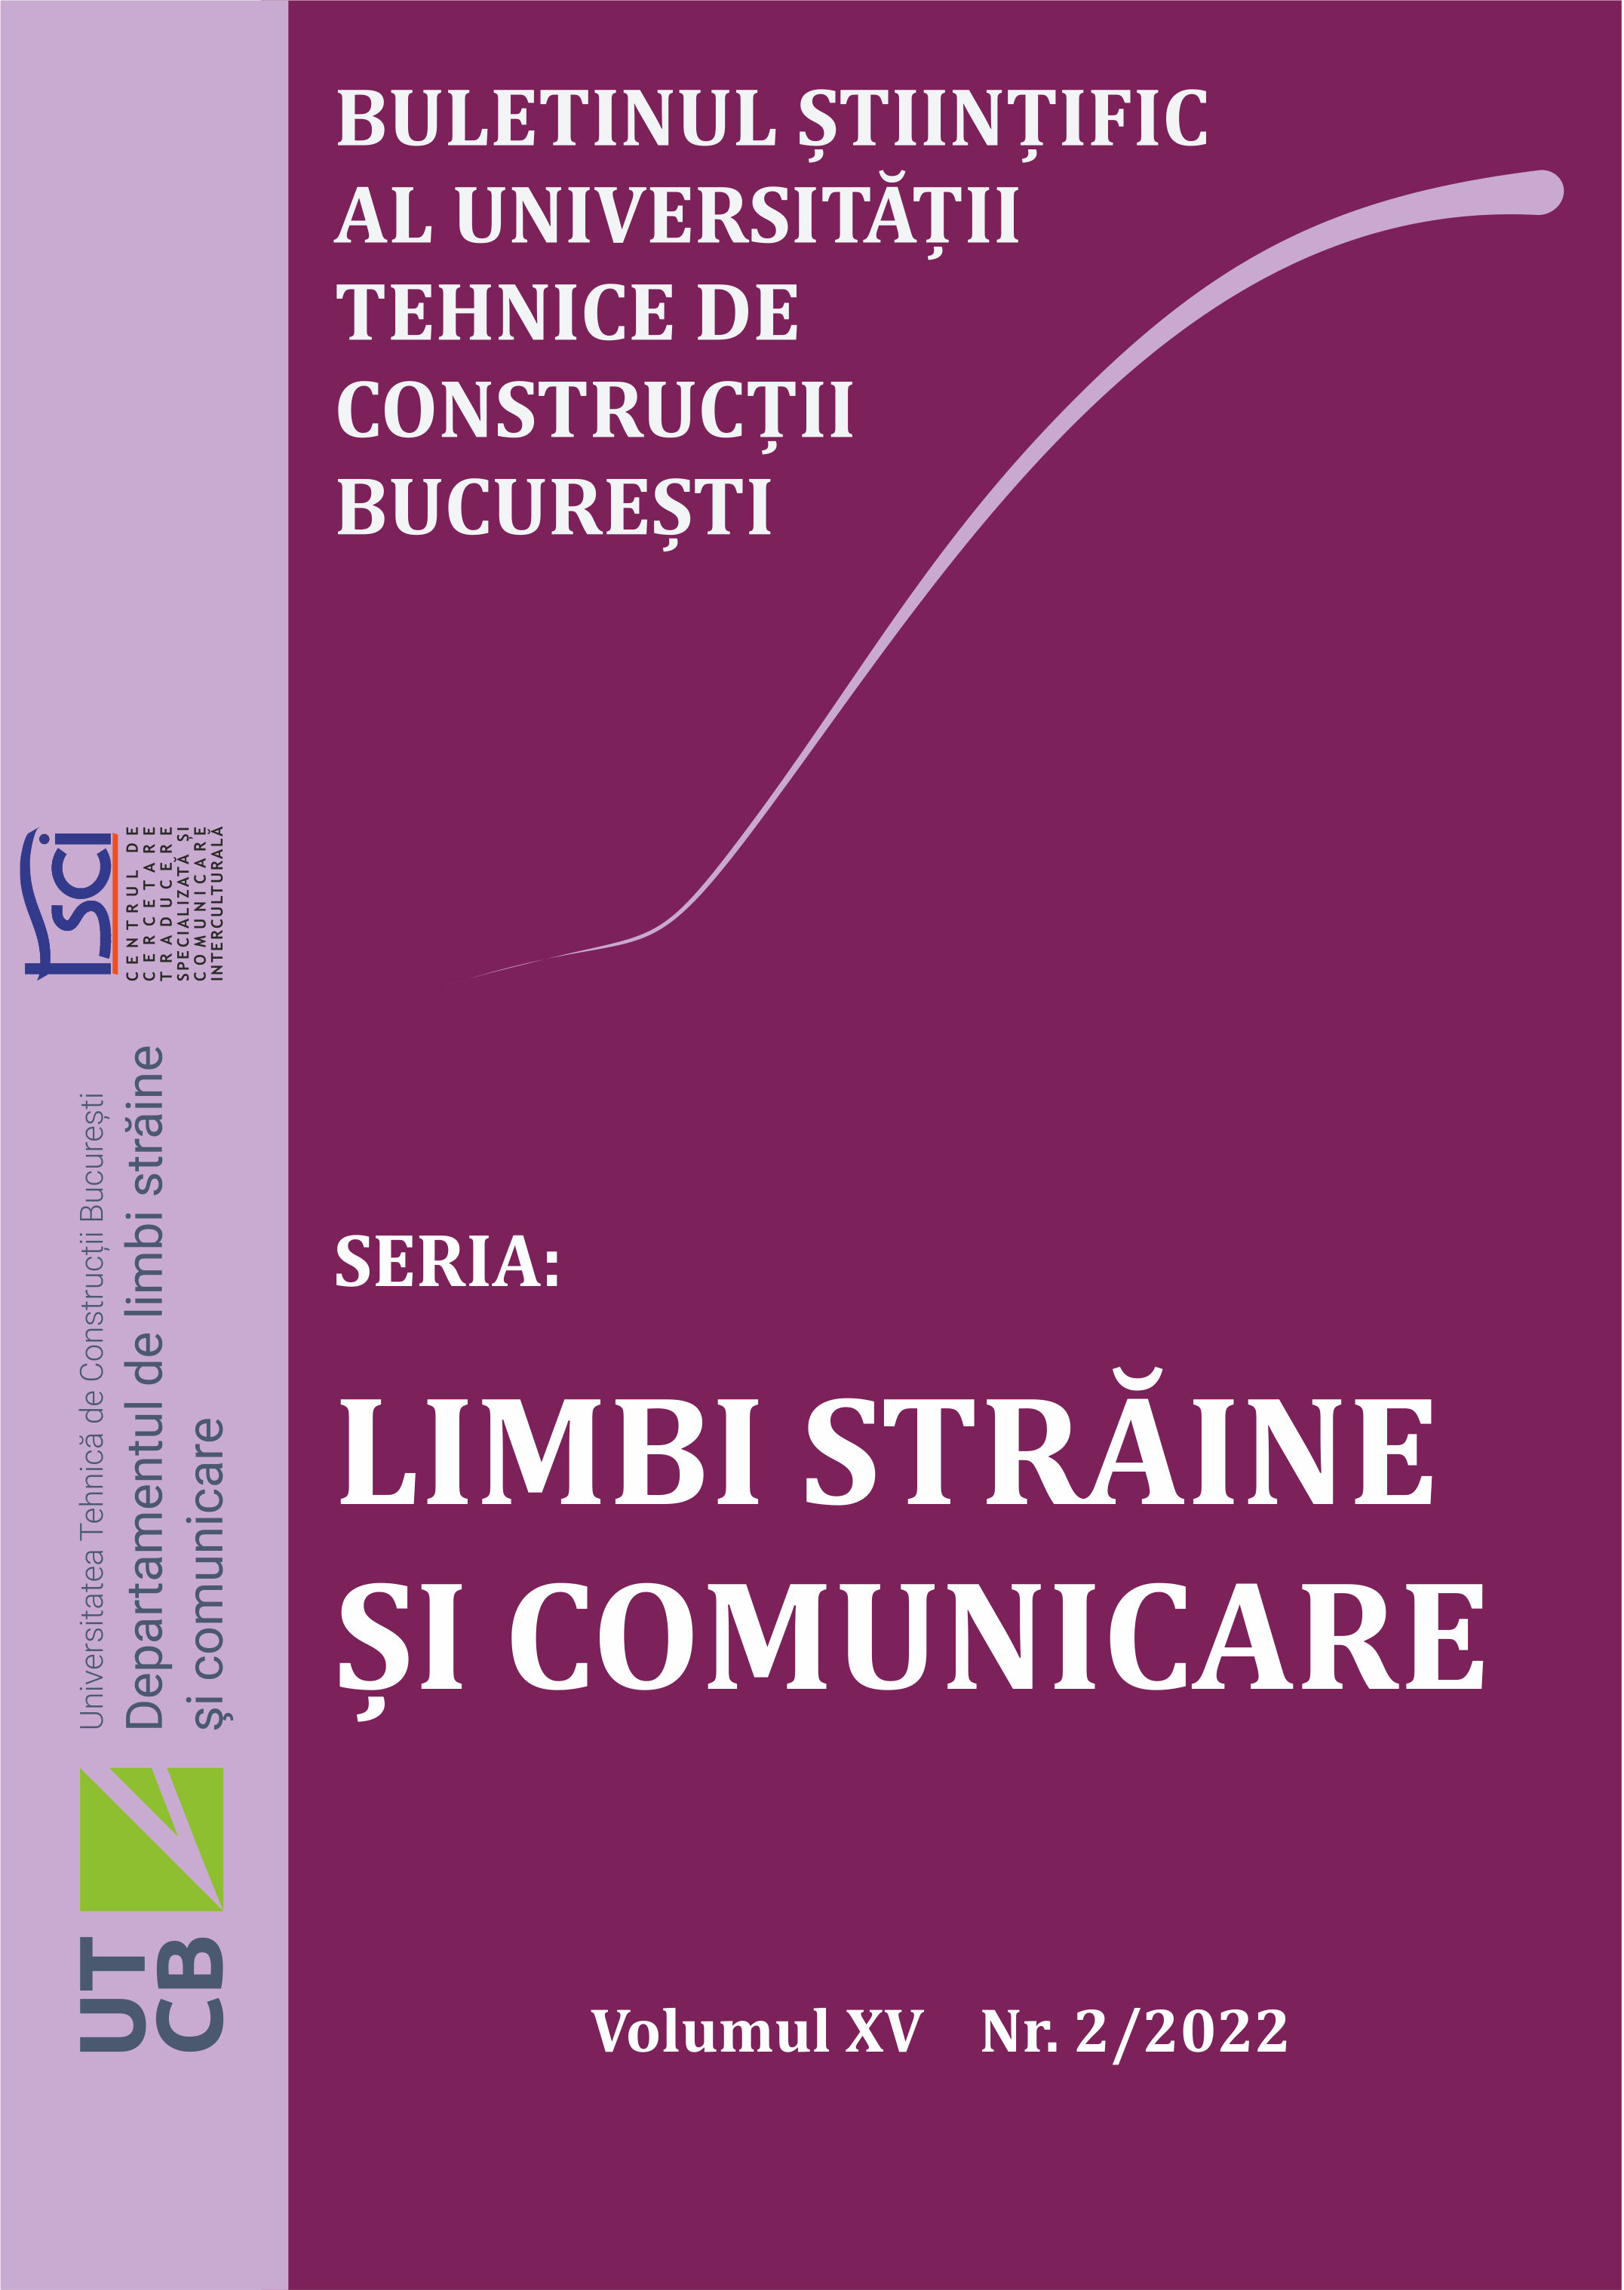 Avornicesei, O. (2022). A Practical Course for Simultaneous Interpretation. Sample Speeches and Practical Activities for the Use of Second-Year M.A. Students in Specialised Translation and Interpretation (MATIS). București: Editura Conspress. Cover Image